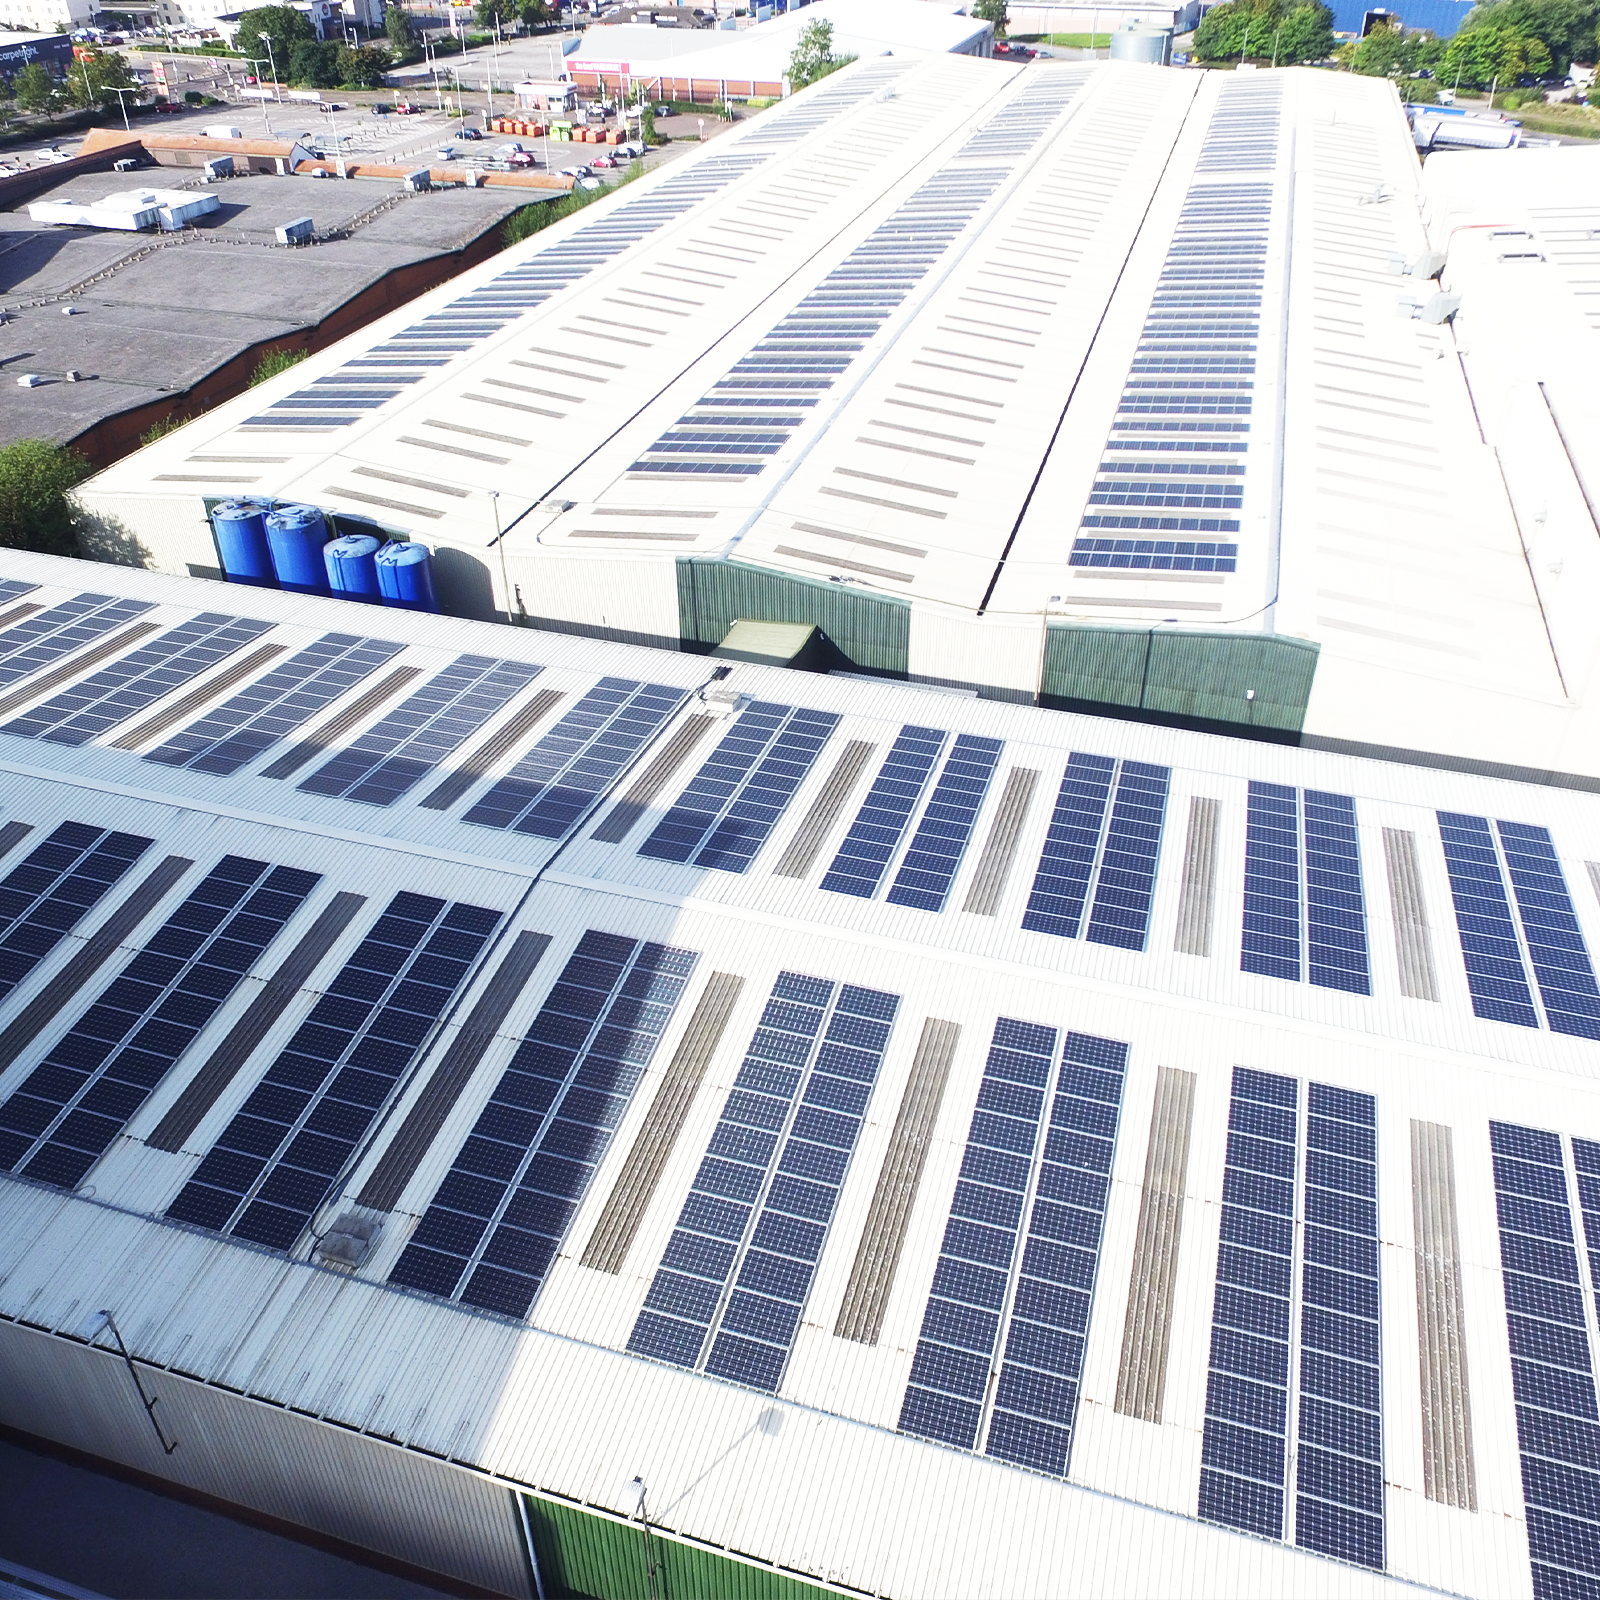 FUCHS UK lubricant manufacturing plant roof showing solar panels